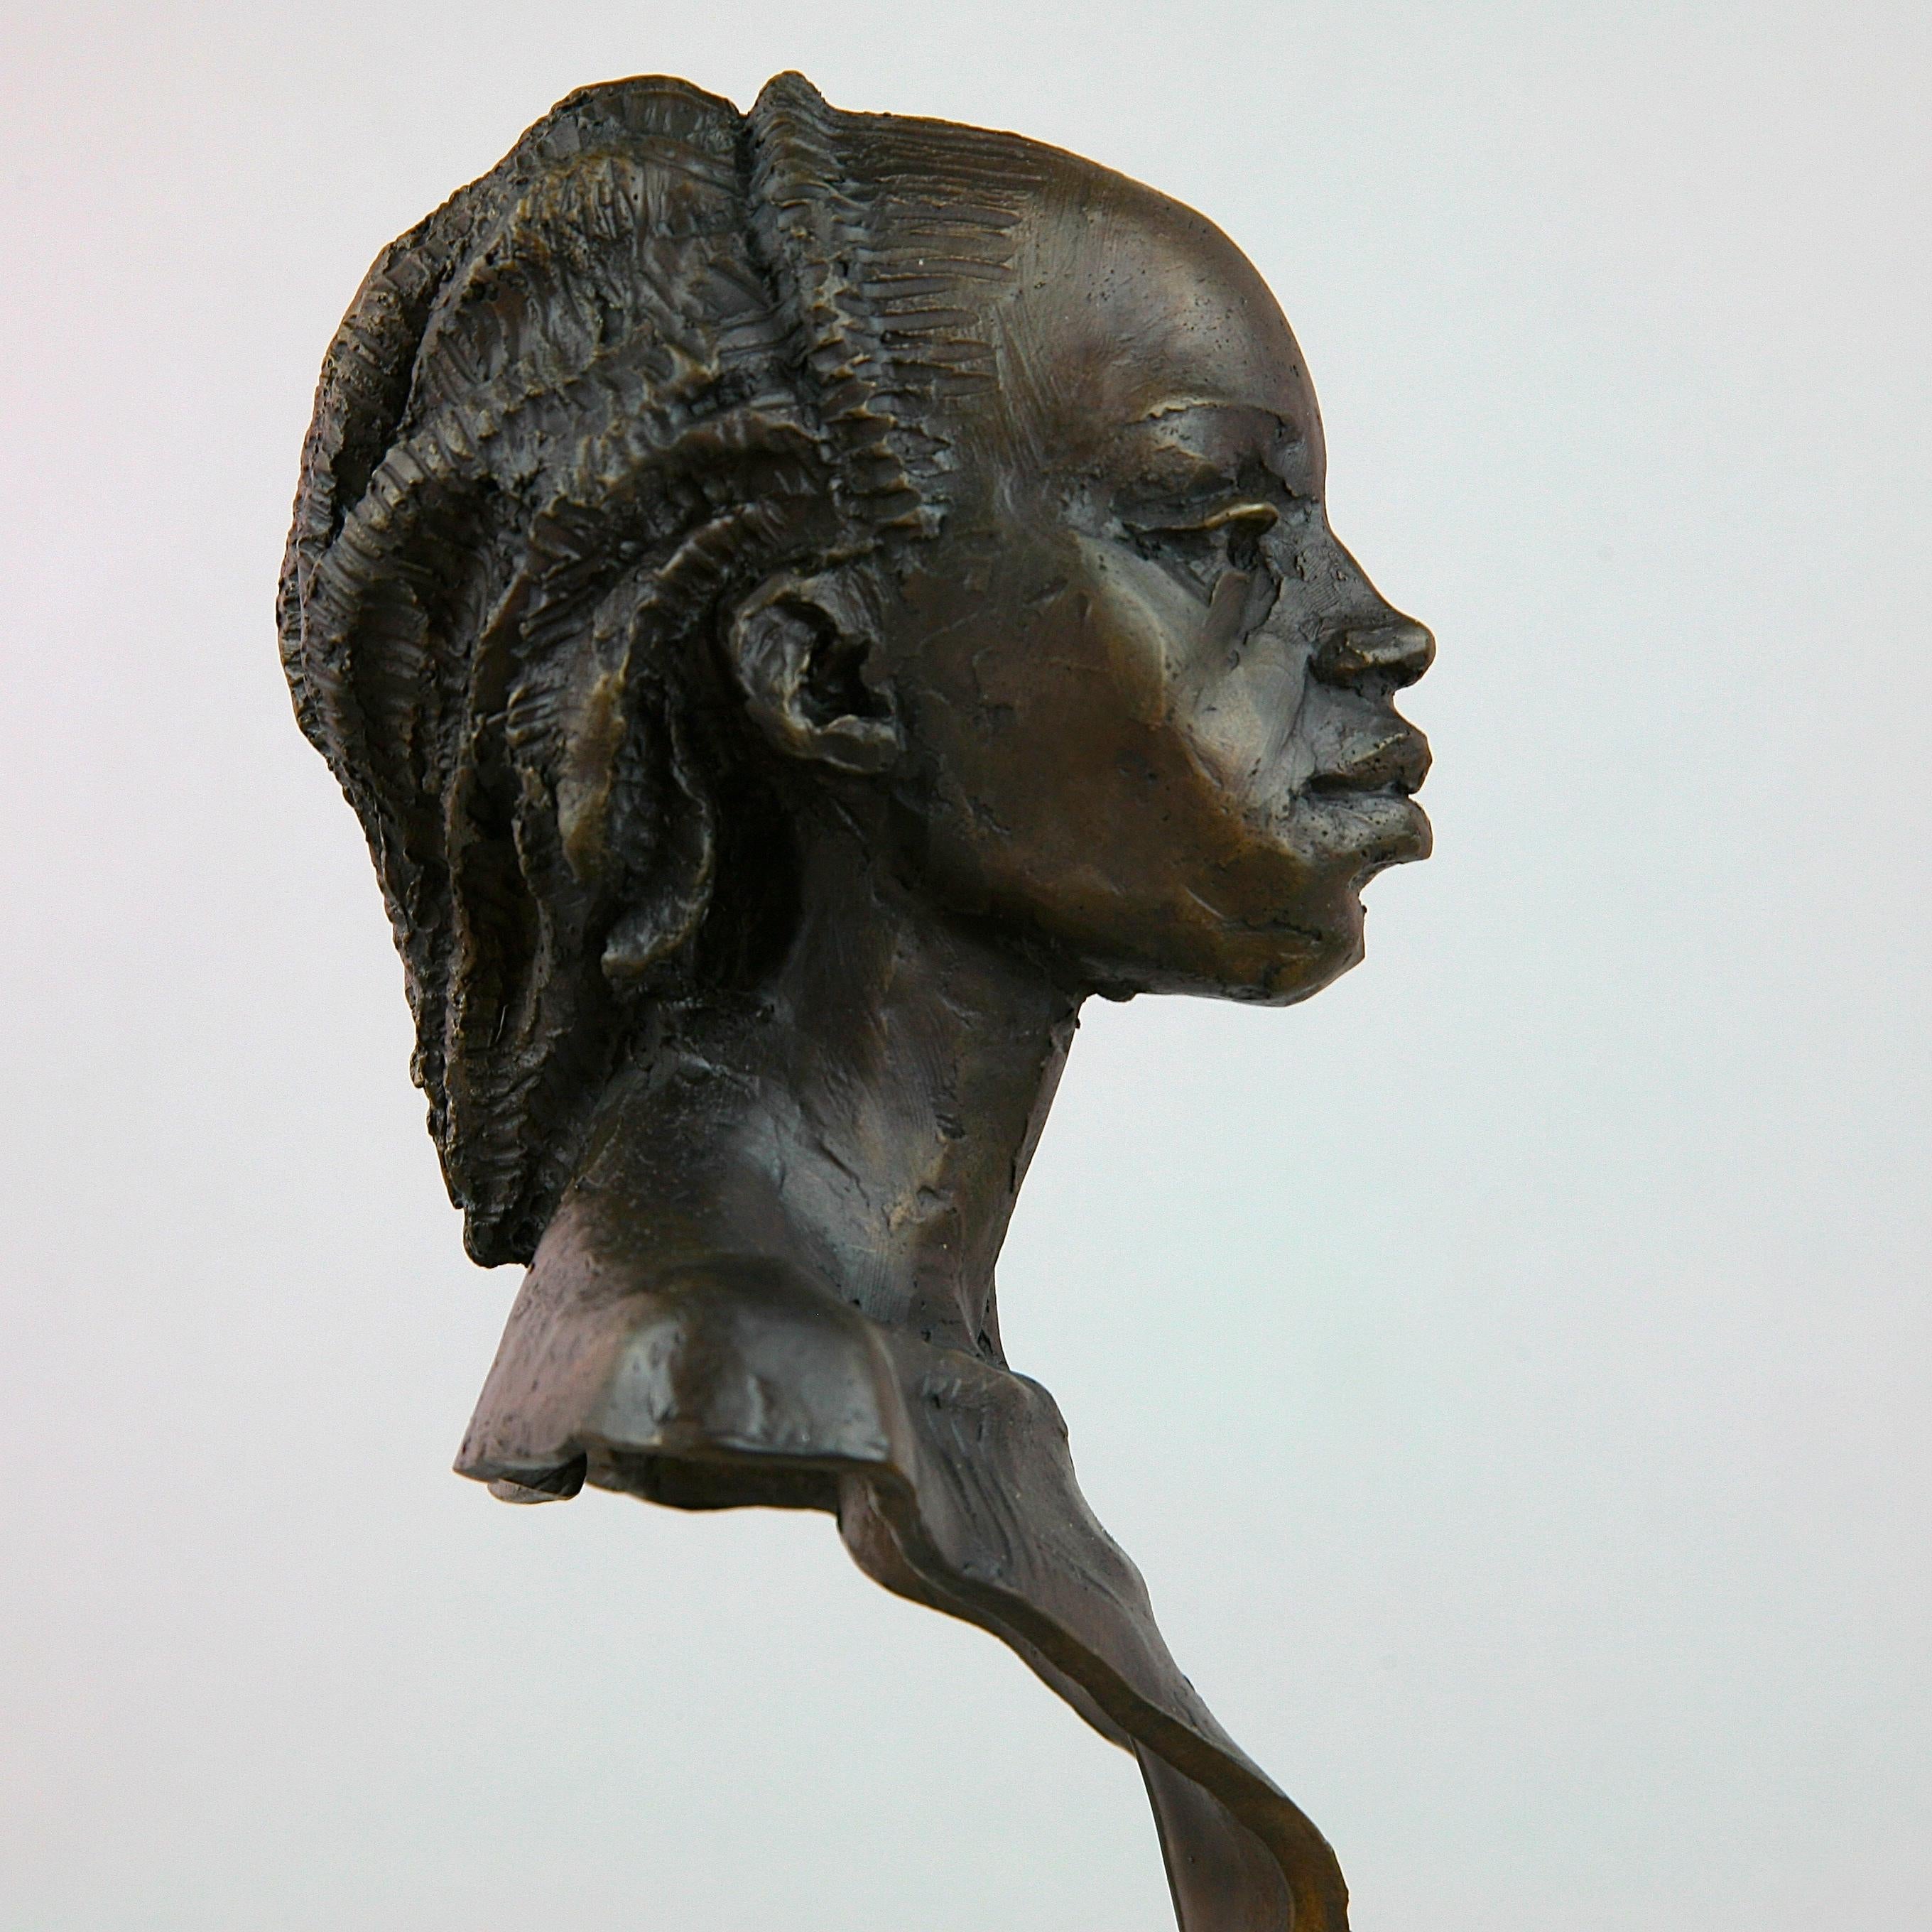 Warrior Woman of Kau Bust bronze sculpture, Limited Edition of 15 is a beautifully sculpted portraiture piece by Andrzej Szymczyk. 

Andrzej graduated with an MA degree in Fine Arts in the faculty of Sculpture from The Academy of Fine Arts in Krakow